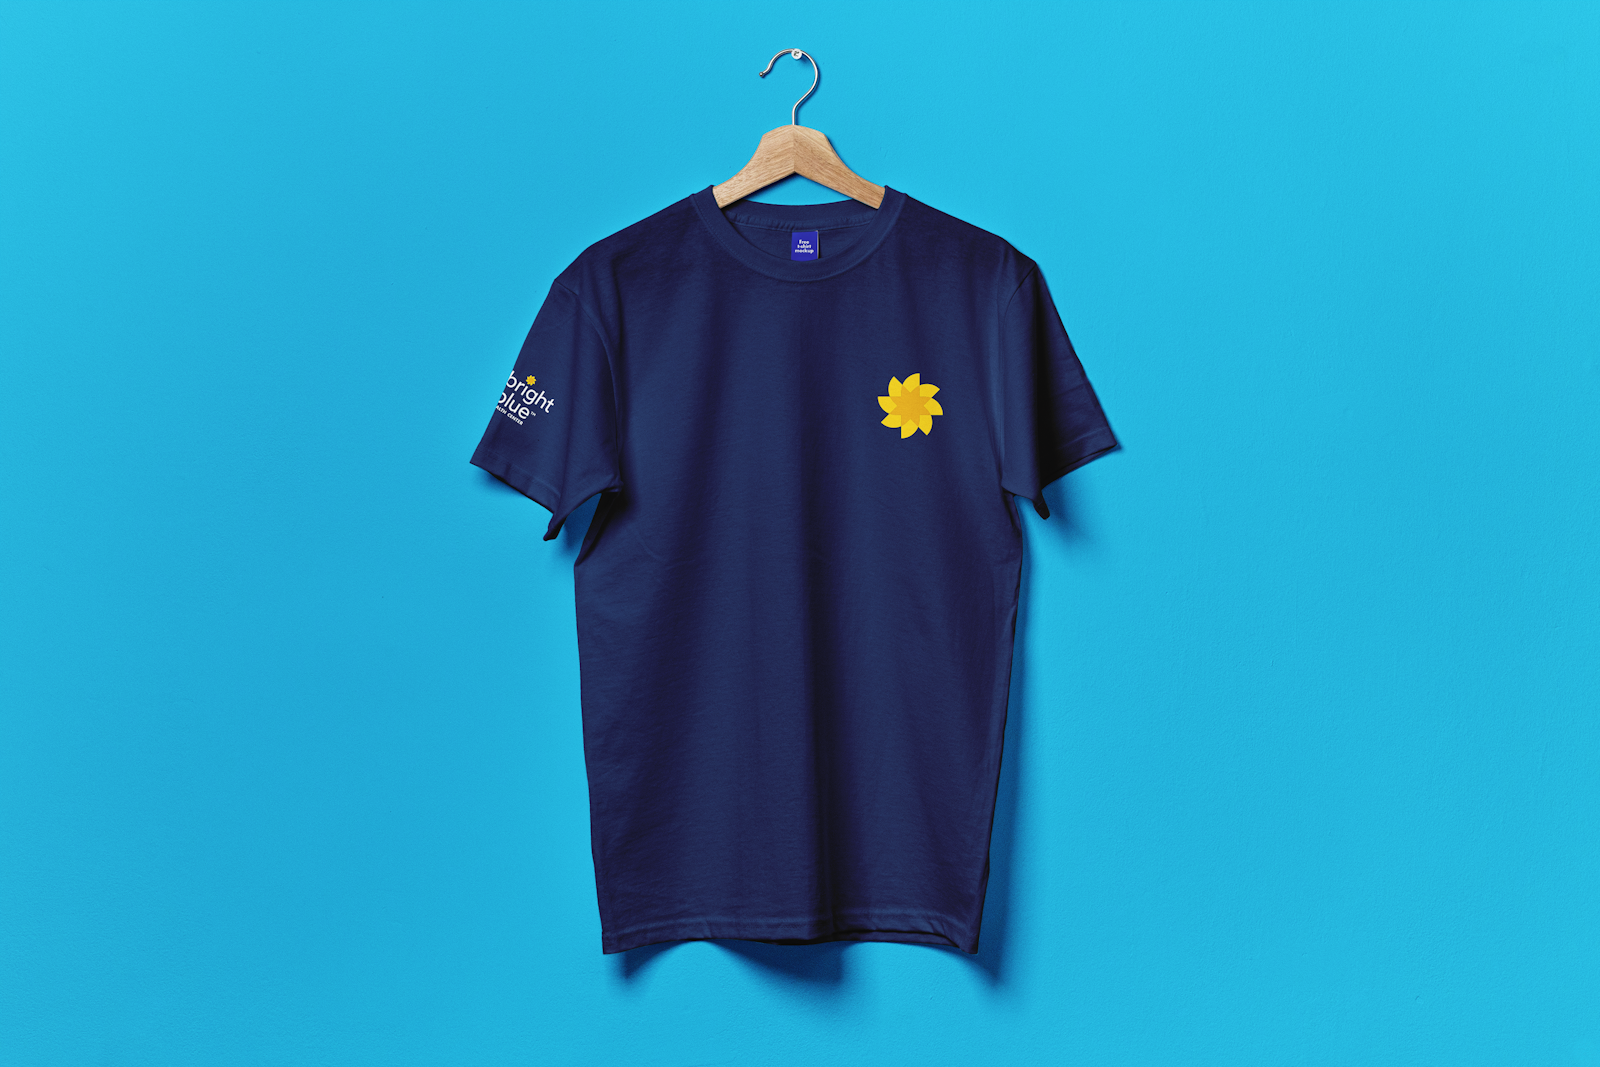 The Bright Blue brand logo design T-Shirt for employees on blue background.